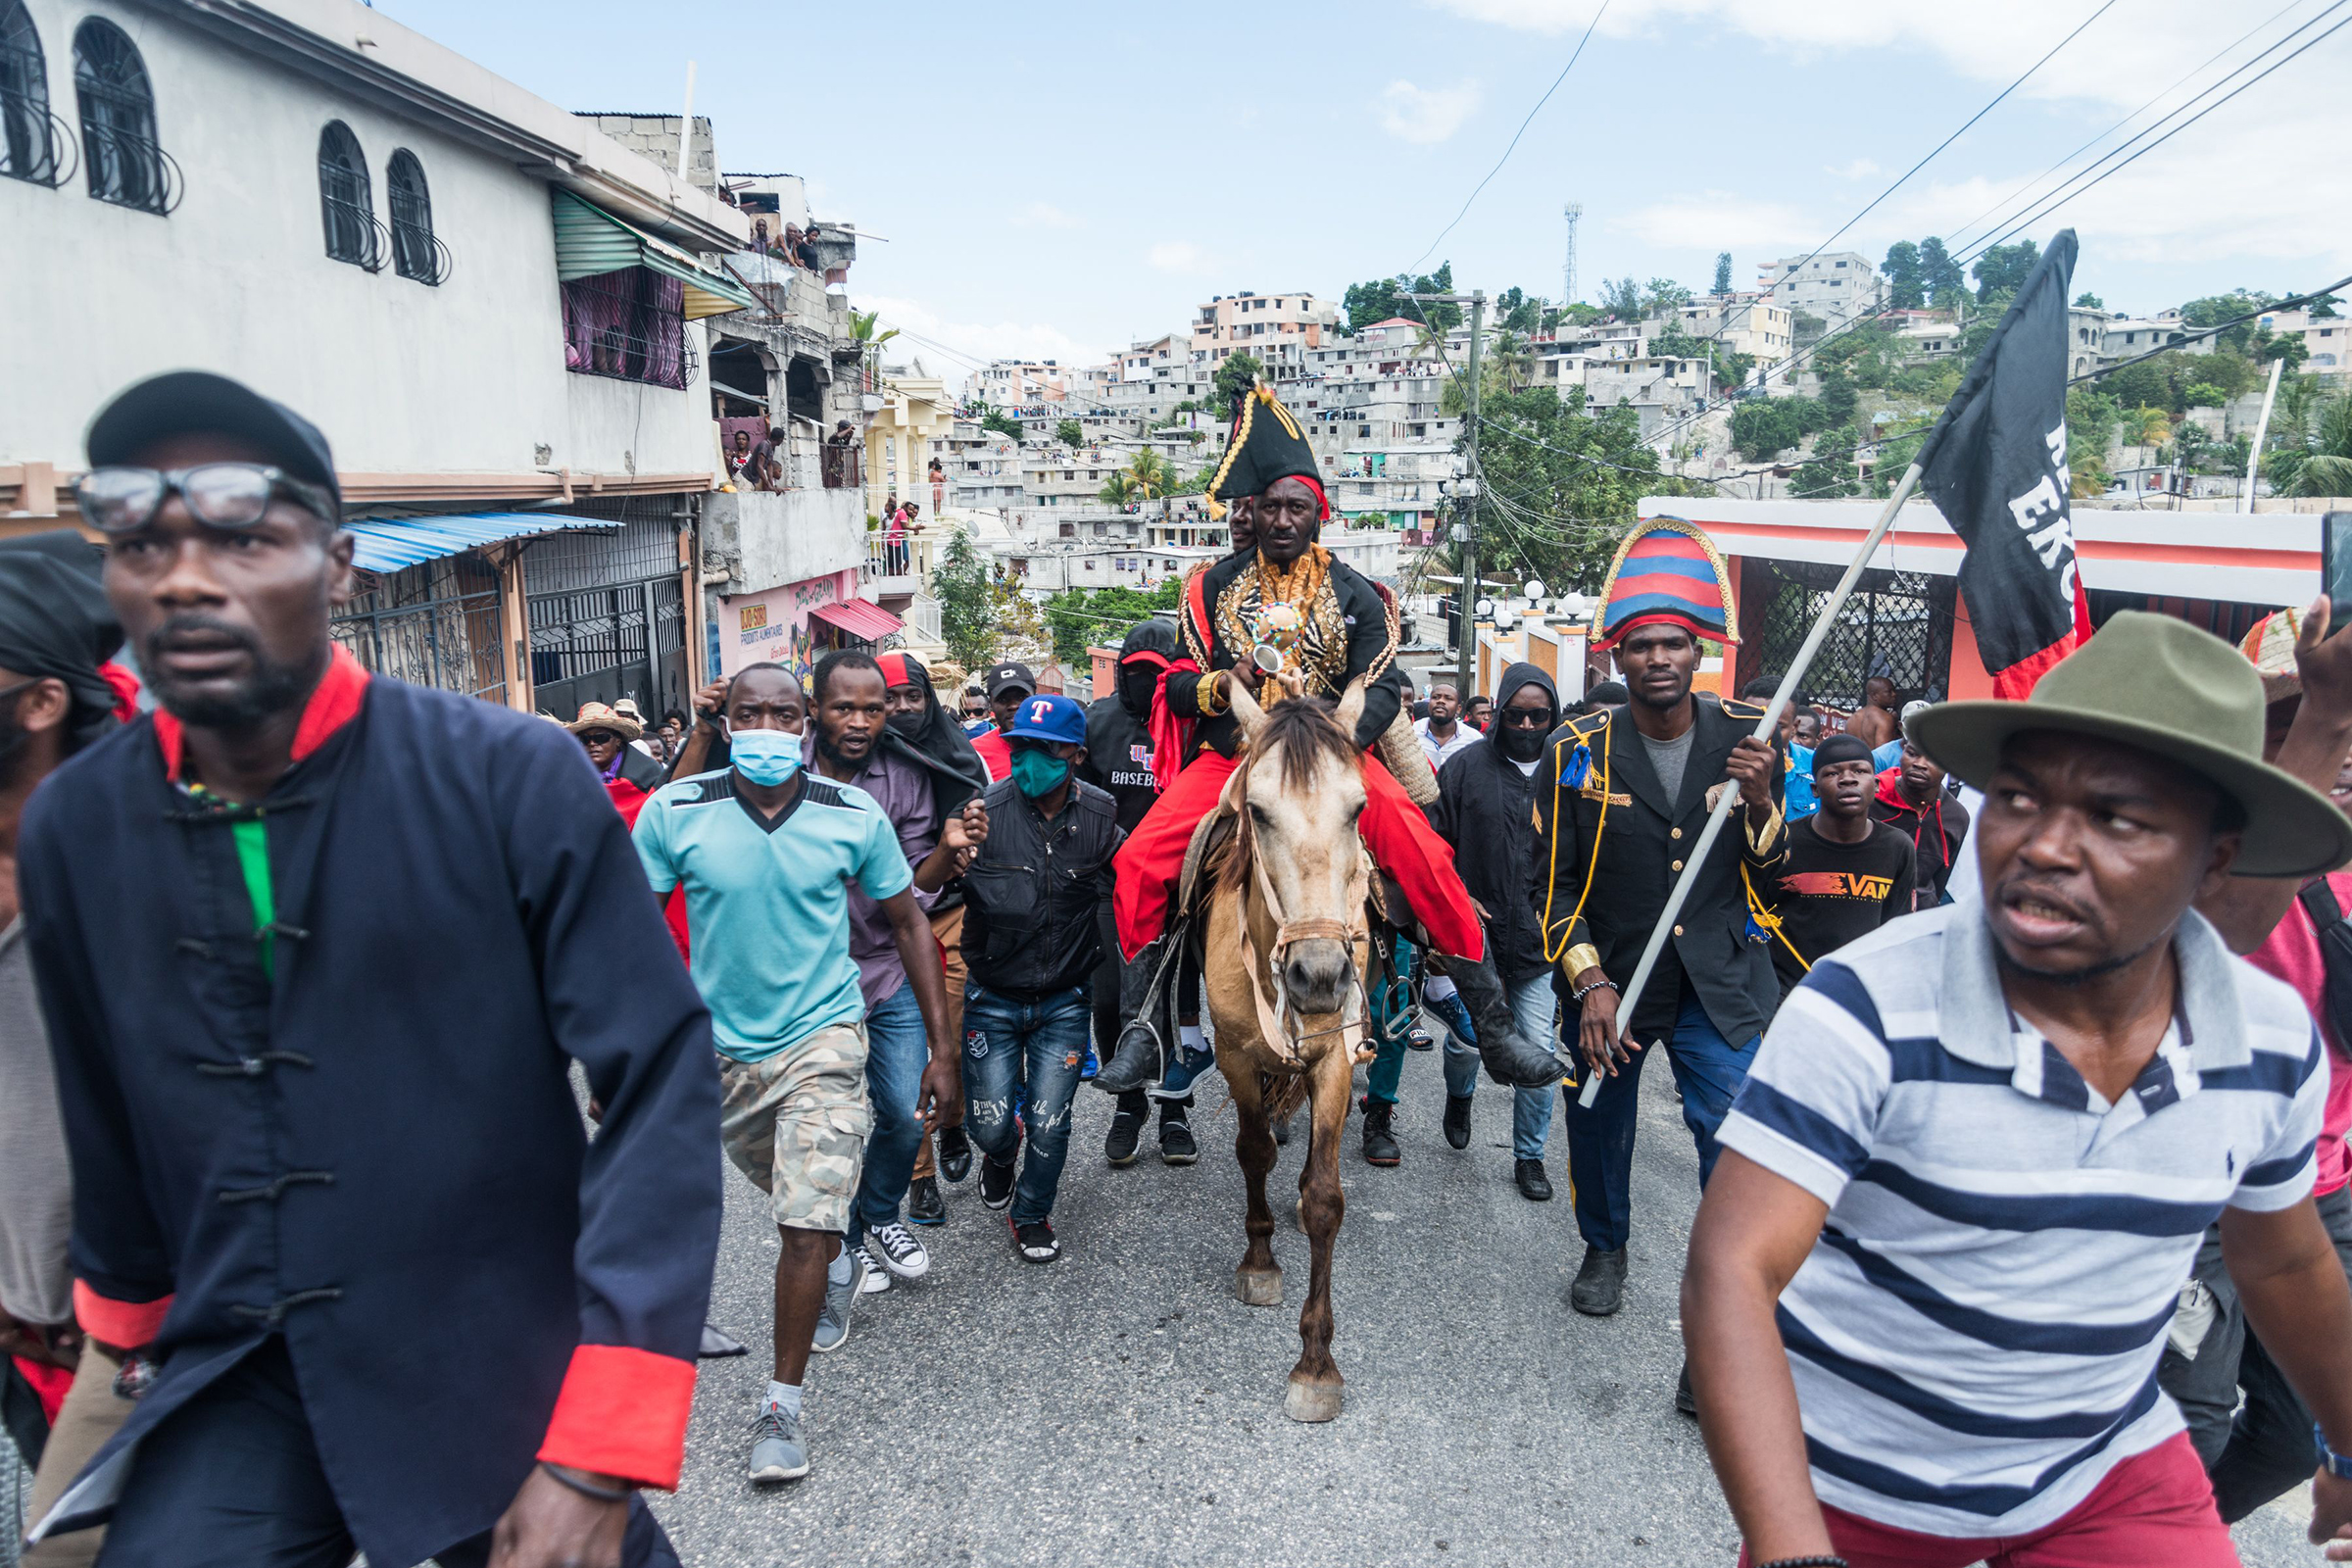 The leader of the "Pitit Desalin" party, Moise Jean Charles, rides a horse as Haitian protesters march through the streets to denounce the upsurge in kidnappings committed by gangs in Port-au-Prince, Haiti, on February 28, 2021. (Reginald Louissaint—AFP/Getty Images)